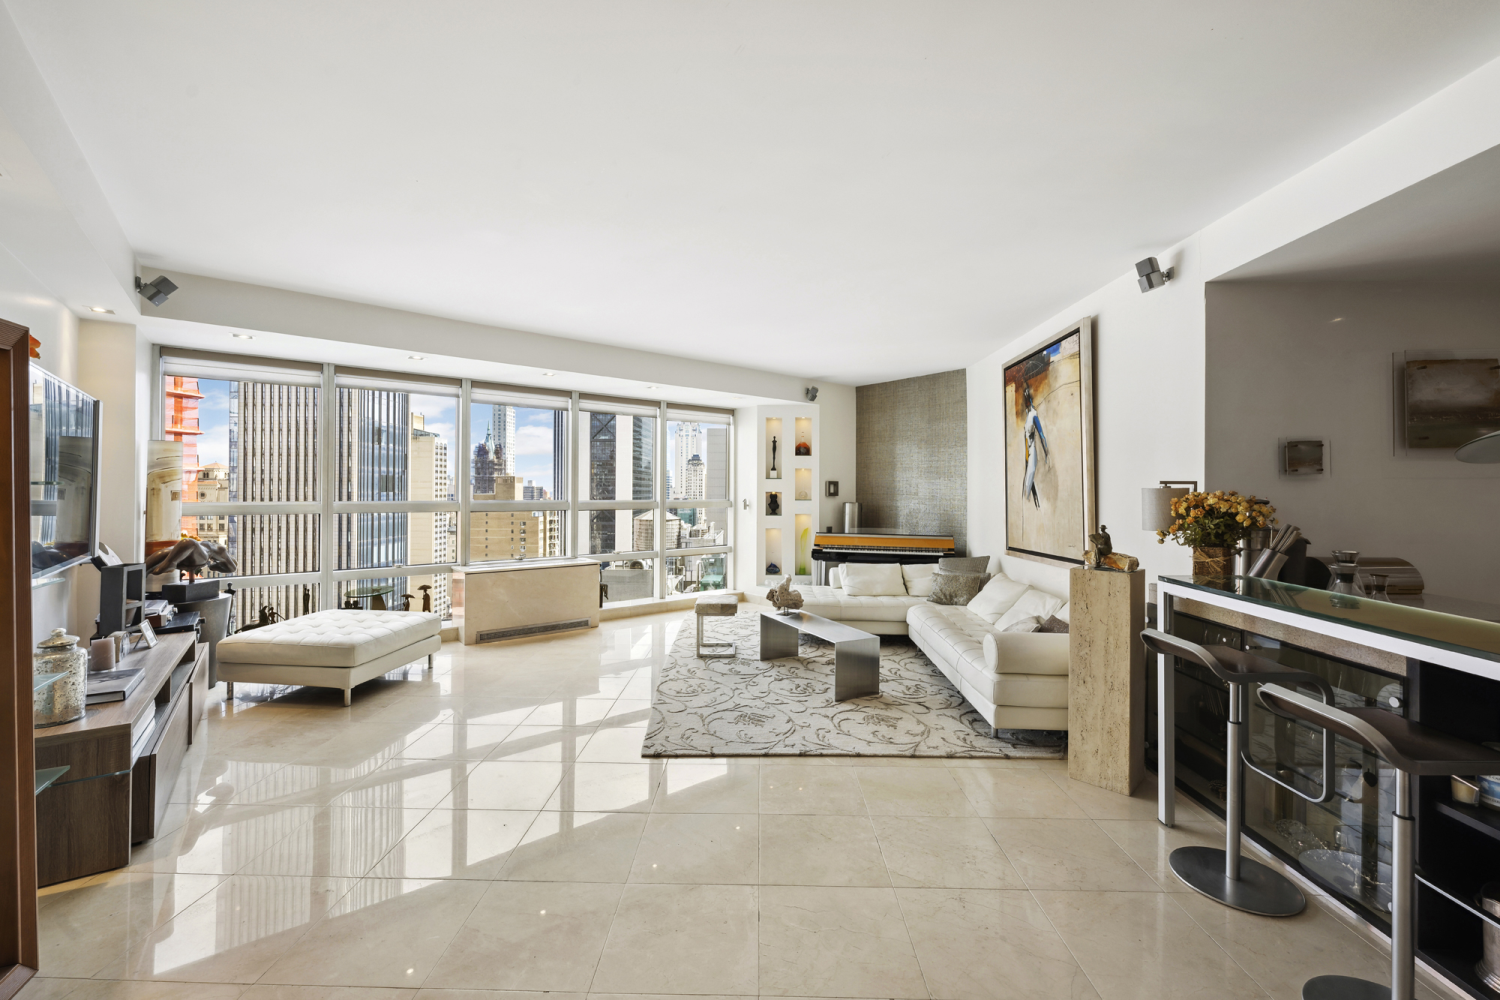 146 West 57th Street 42C, Chelsea And Clinton, Downtown, NYC - 2 Bedrooms  
2.5 Bathrooms  
4 Rooms - 